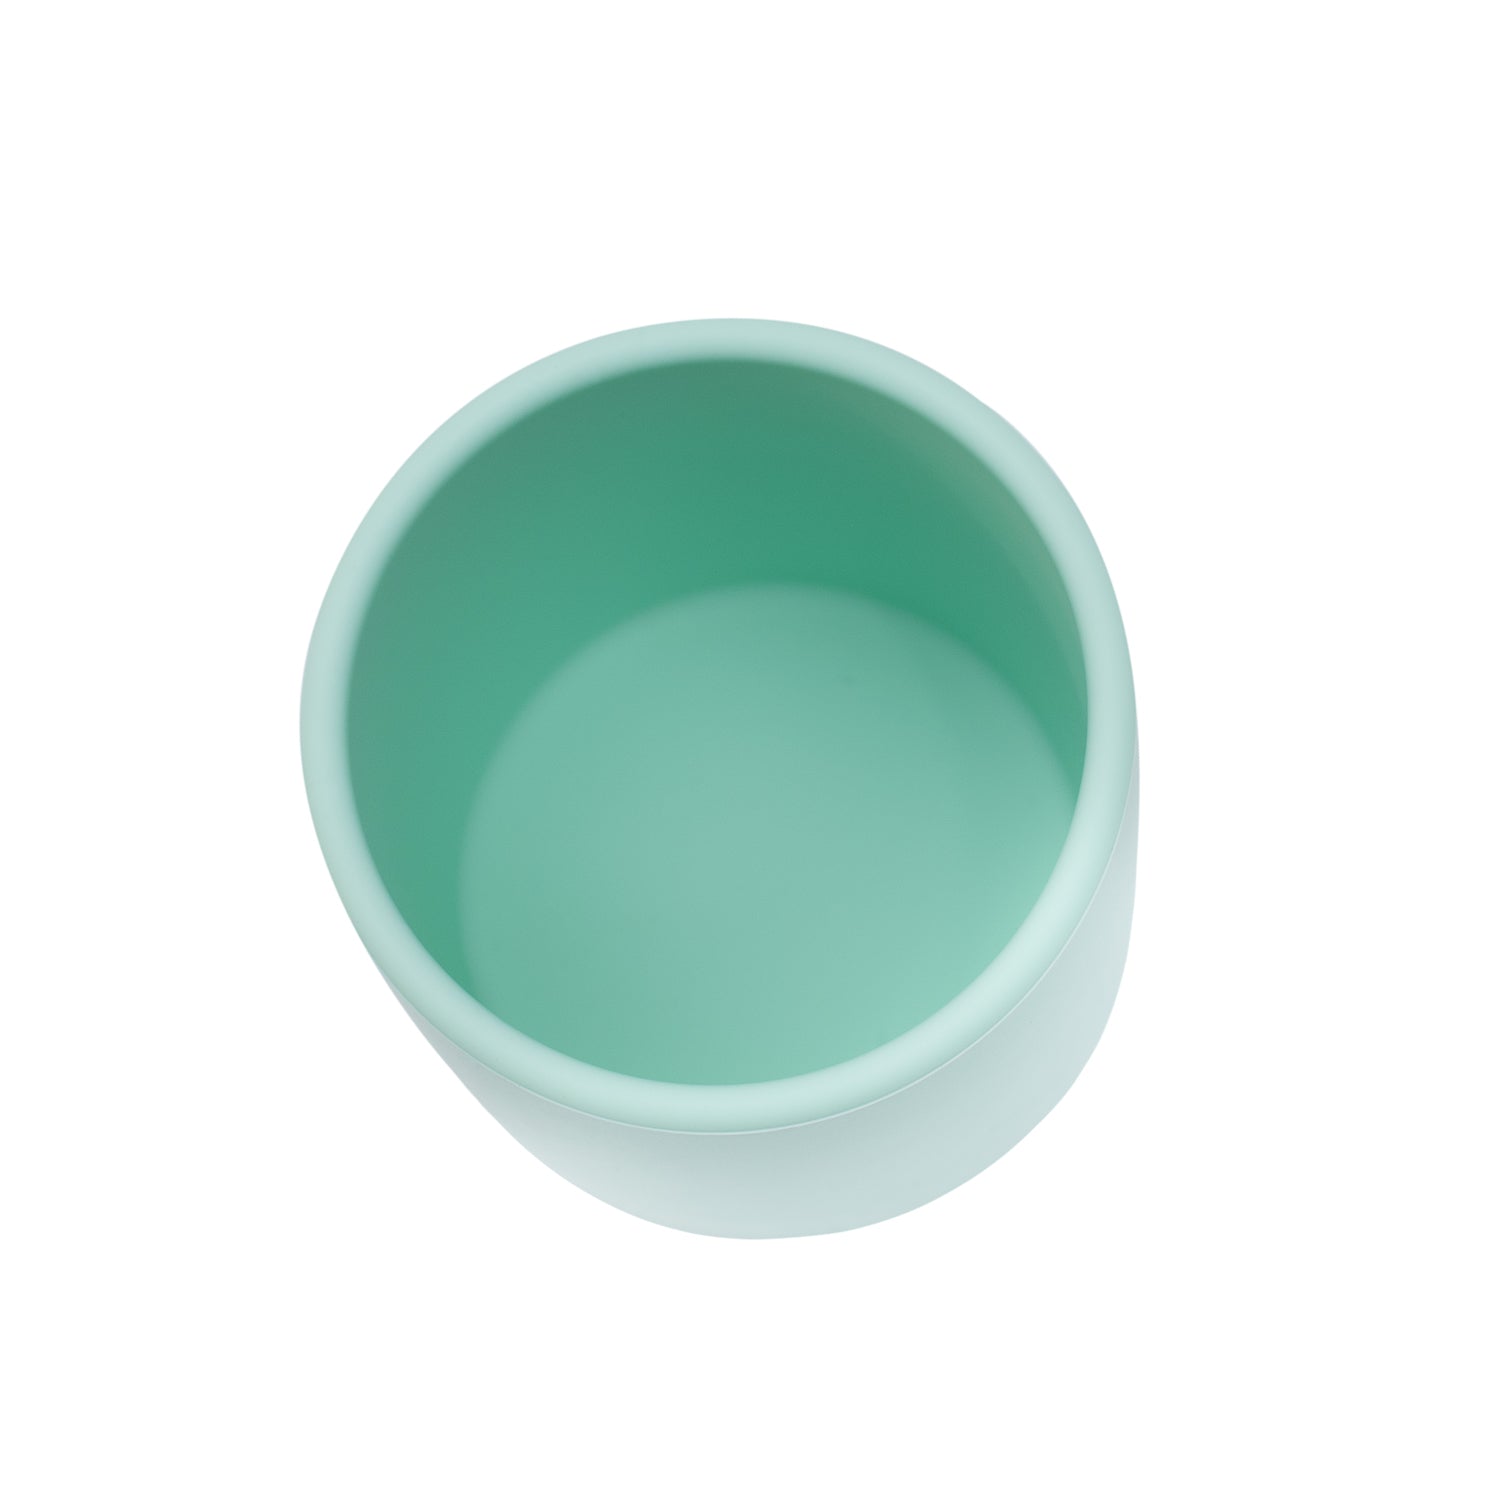 Silicone grip cup in Mint